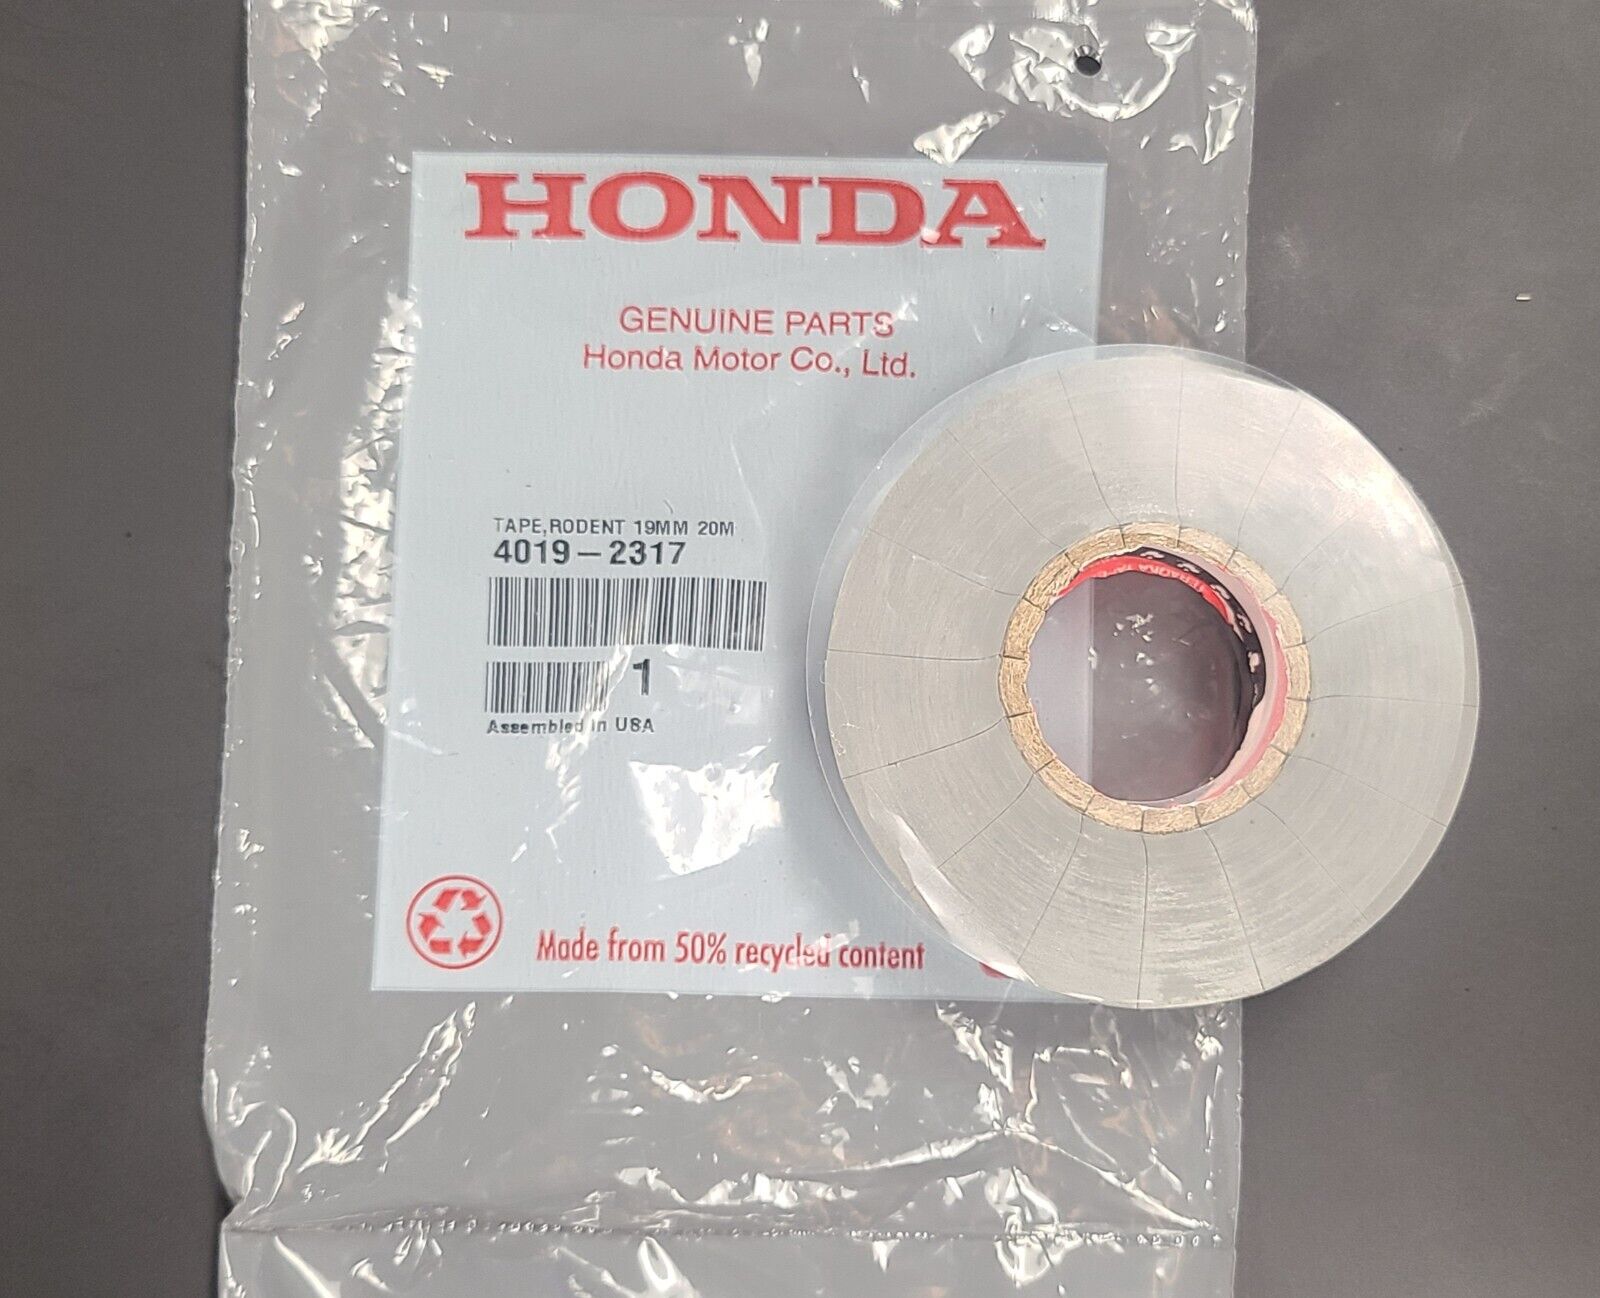 Genuine Oem Acura Honda Rodent Proof Electrical Tape 4019-2317